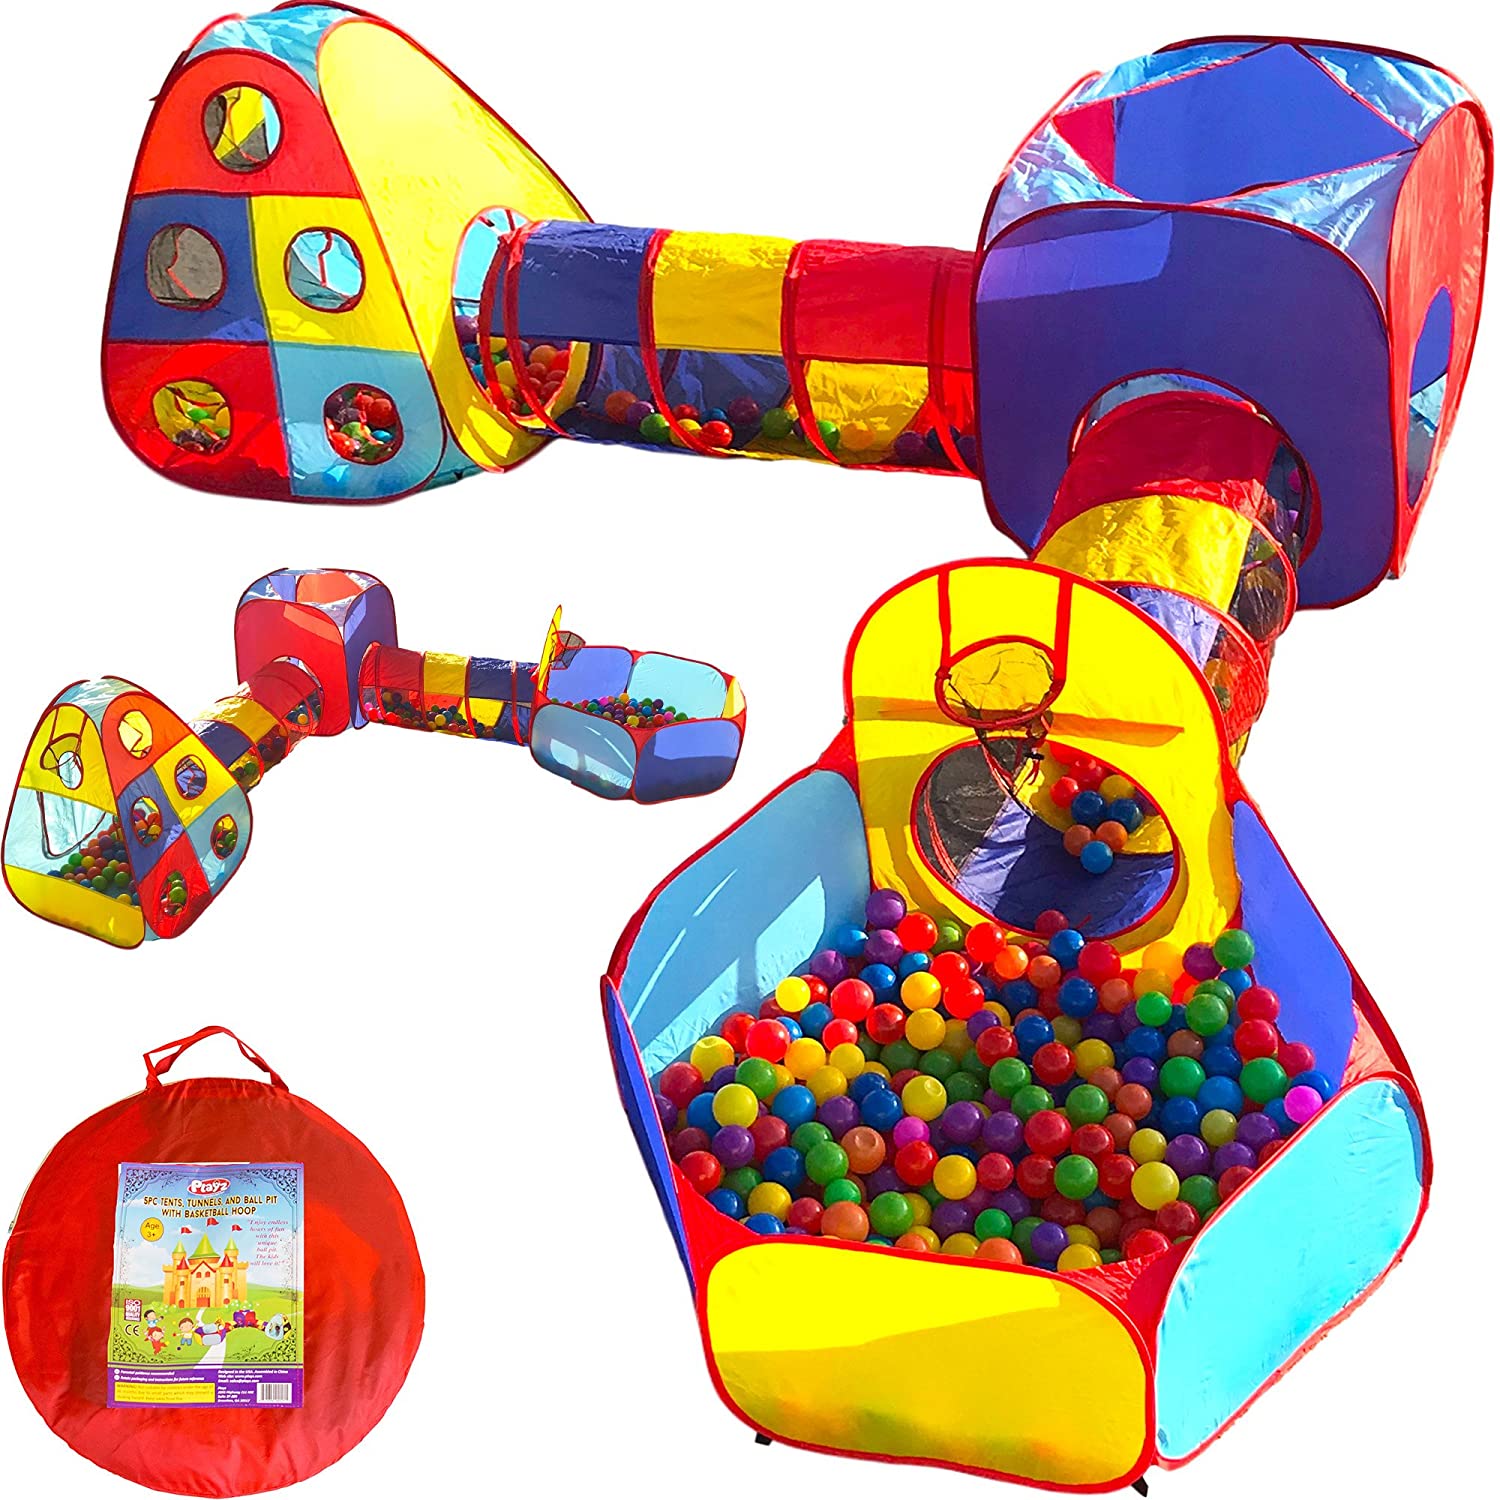 Top 9 Best Ball Pit for Kids Reviews in 2023 4